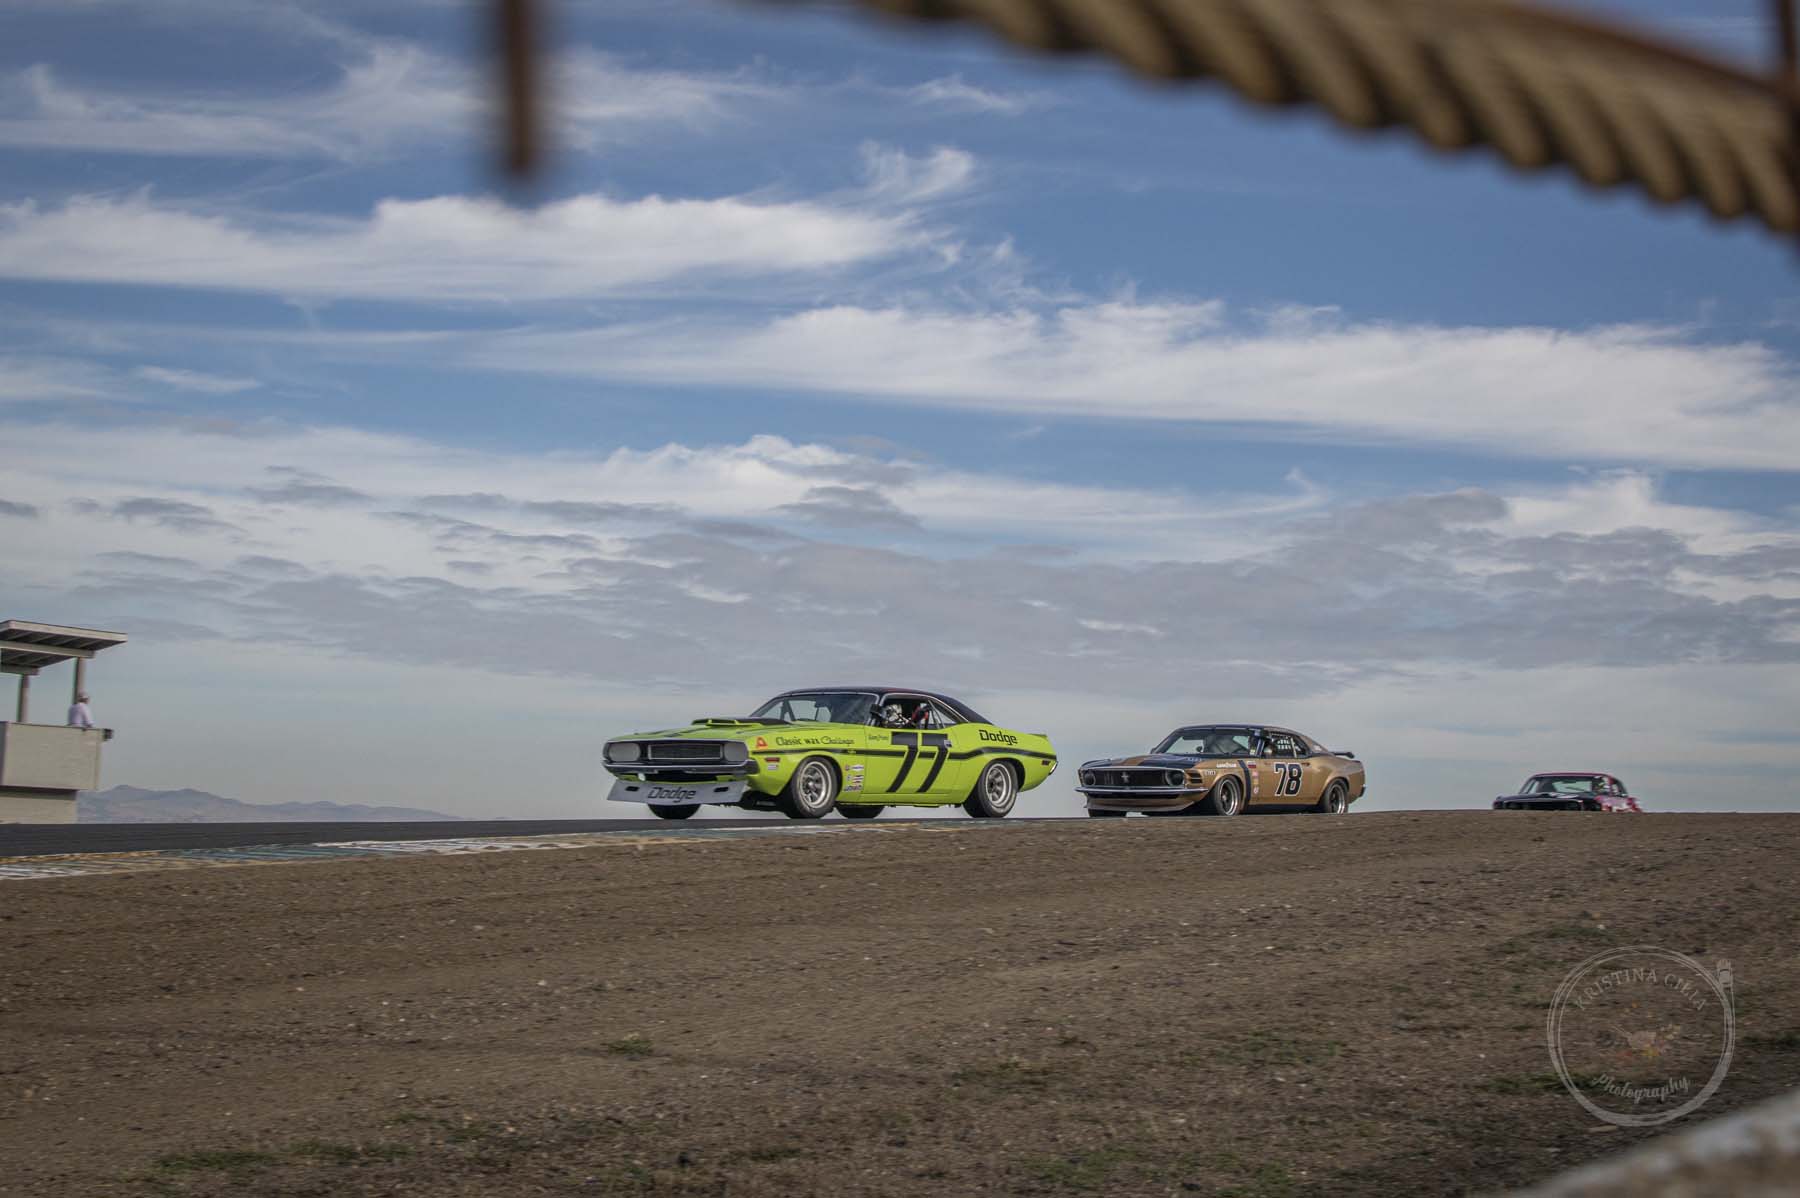 A 1970 Dodge Challenger leads the Historic Trans Am group over the hill into Turn 4 at Sonoma Raceway